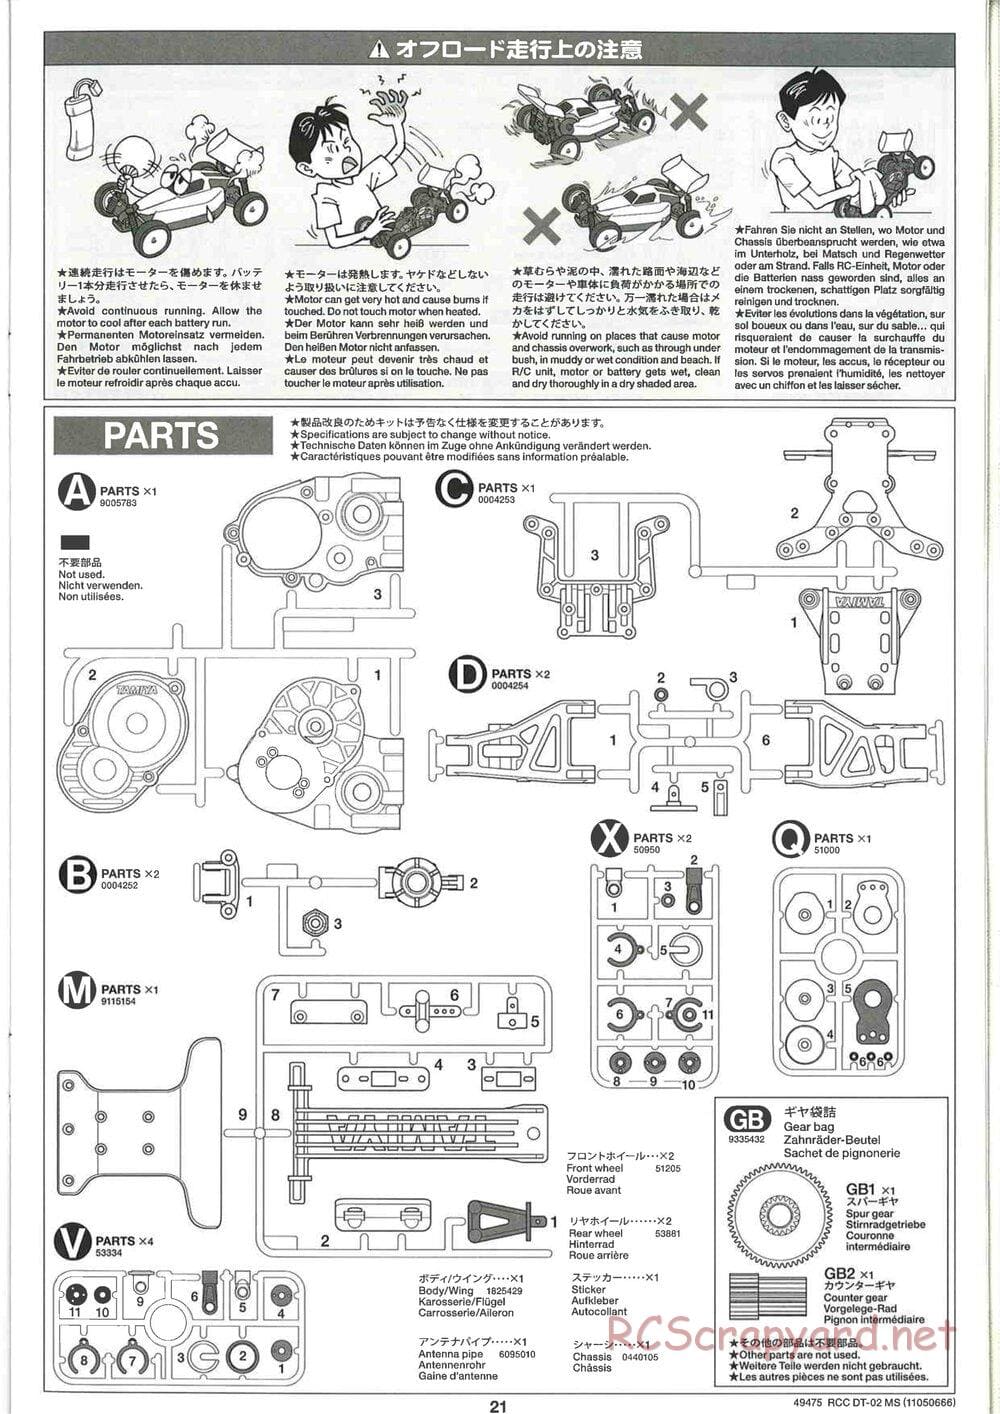 Tamiya - DT-02 MS Chassis - Manual - Page 22